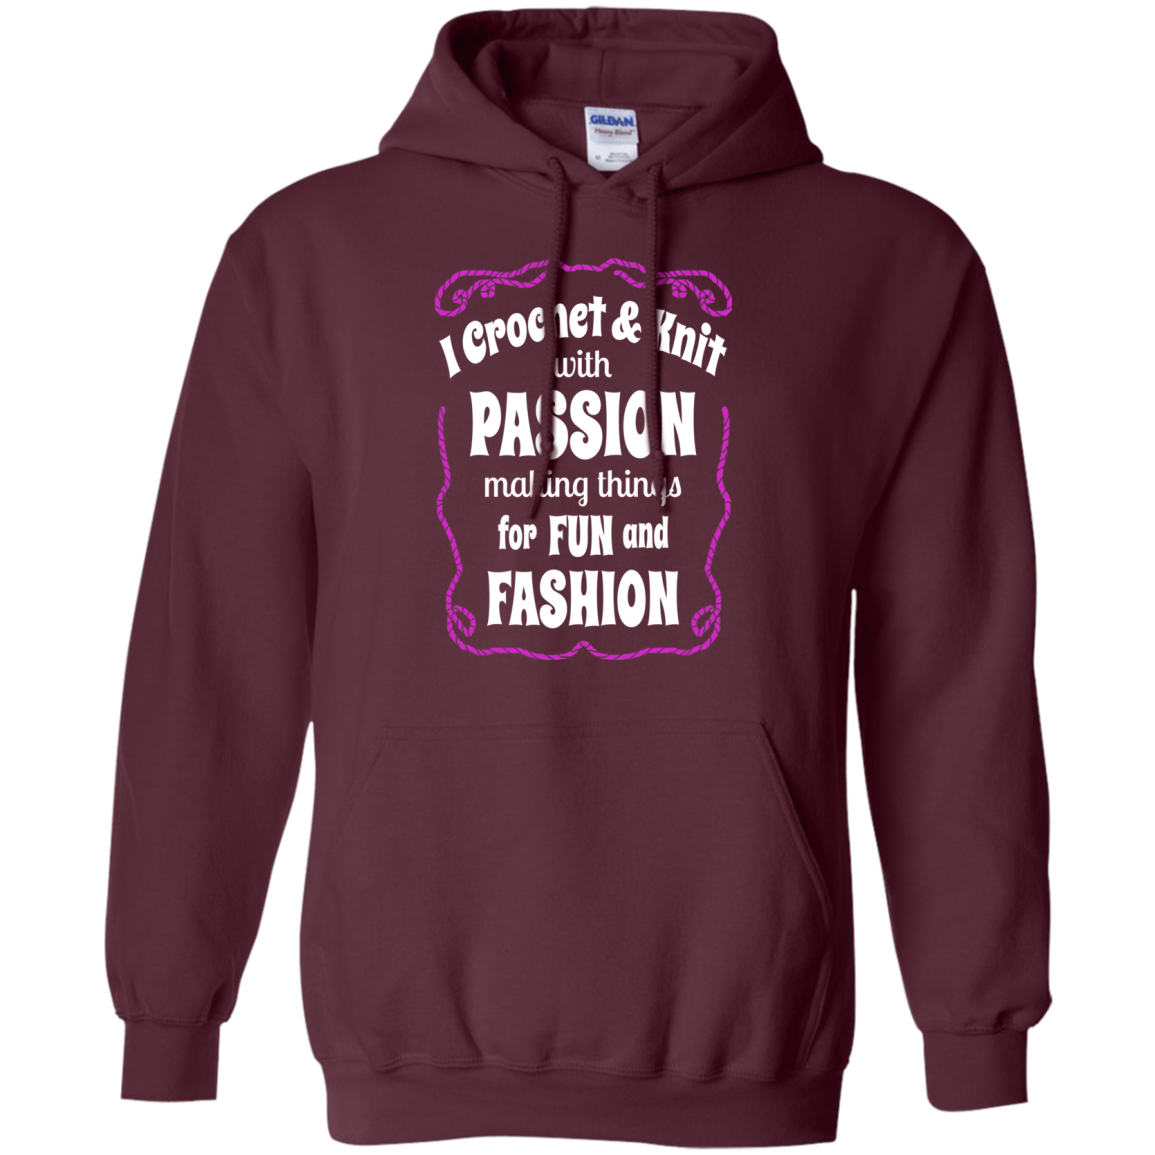 I Crochet & Knit with Passion Pullover Hoodie